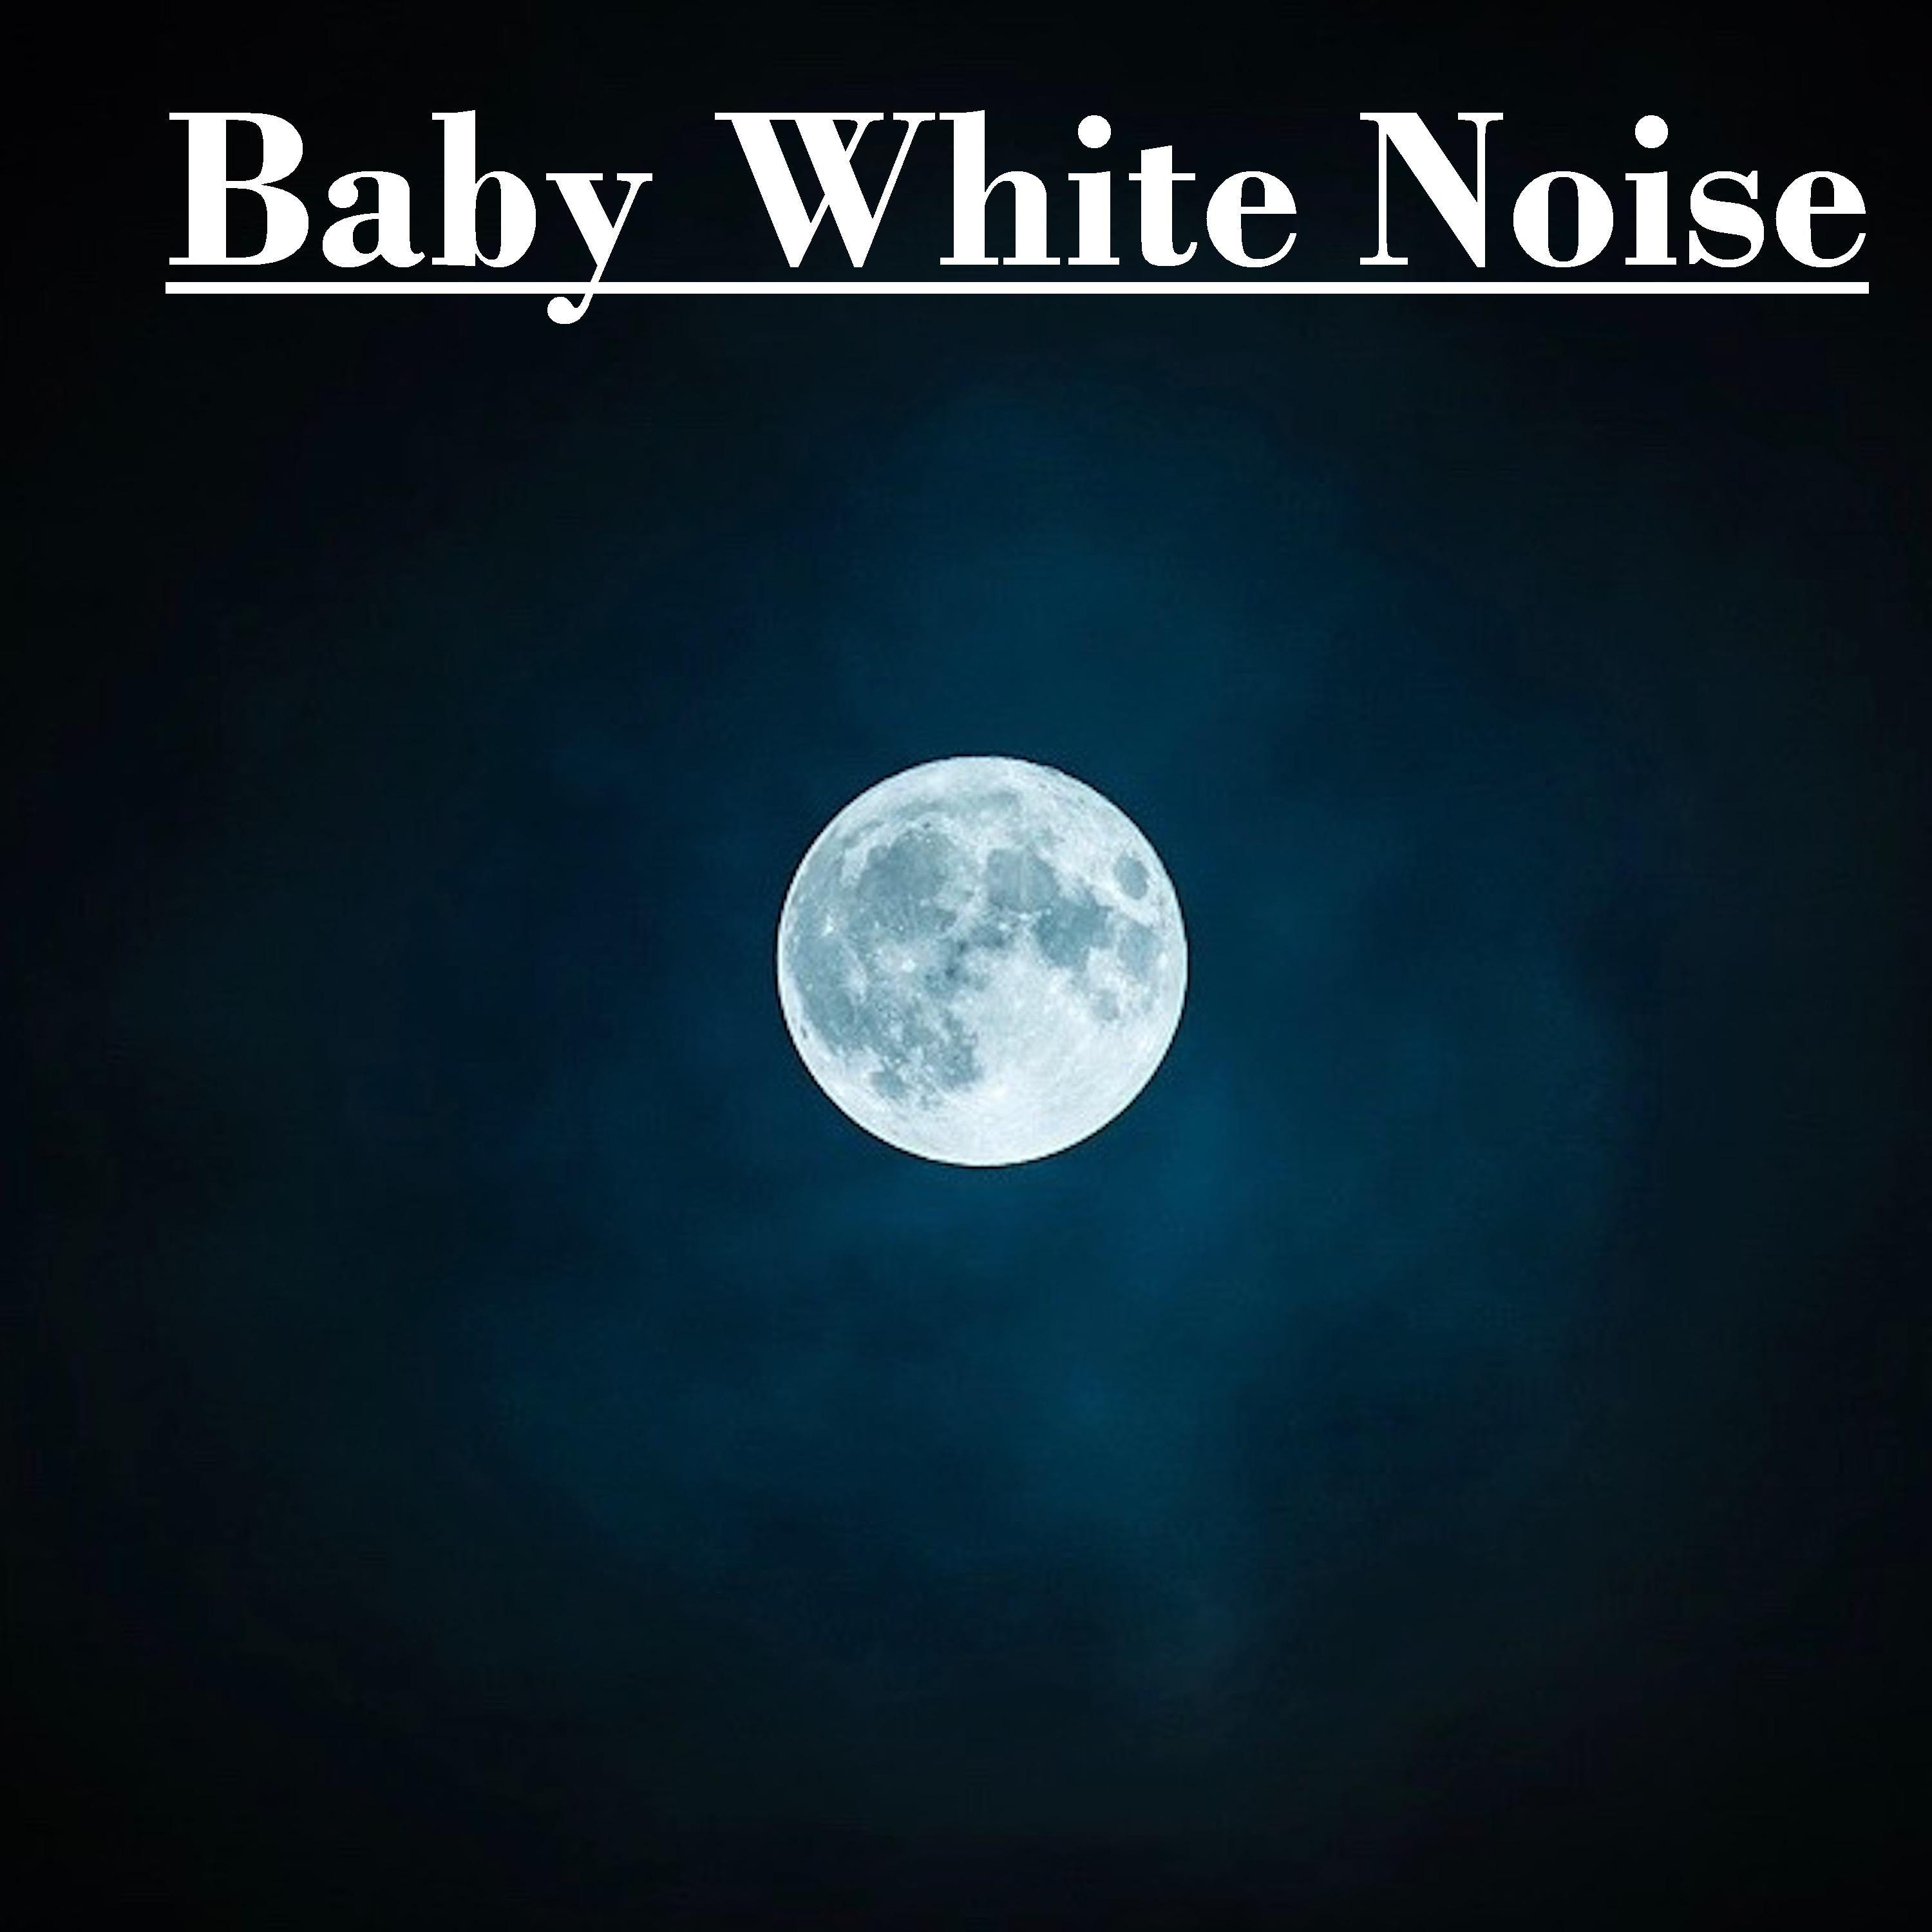 15 Baby White Noise Sounds - Natural Rain